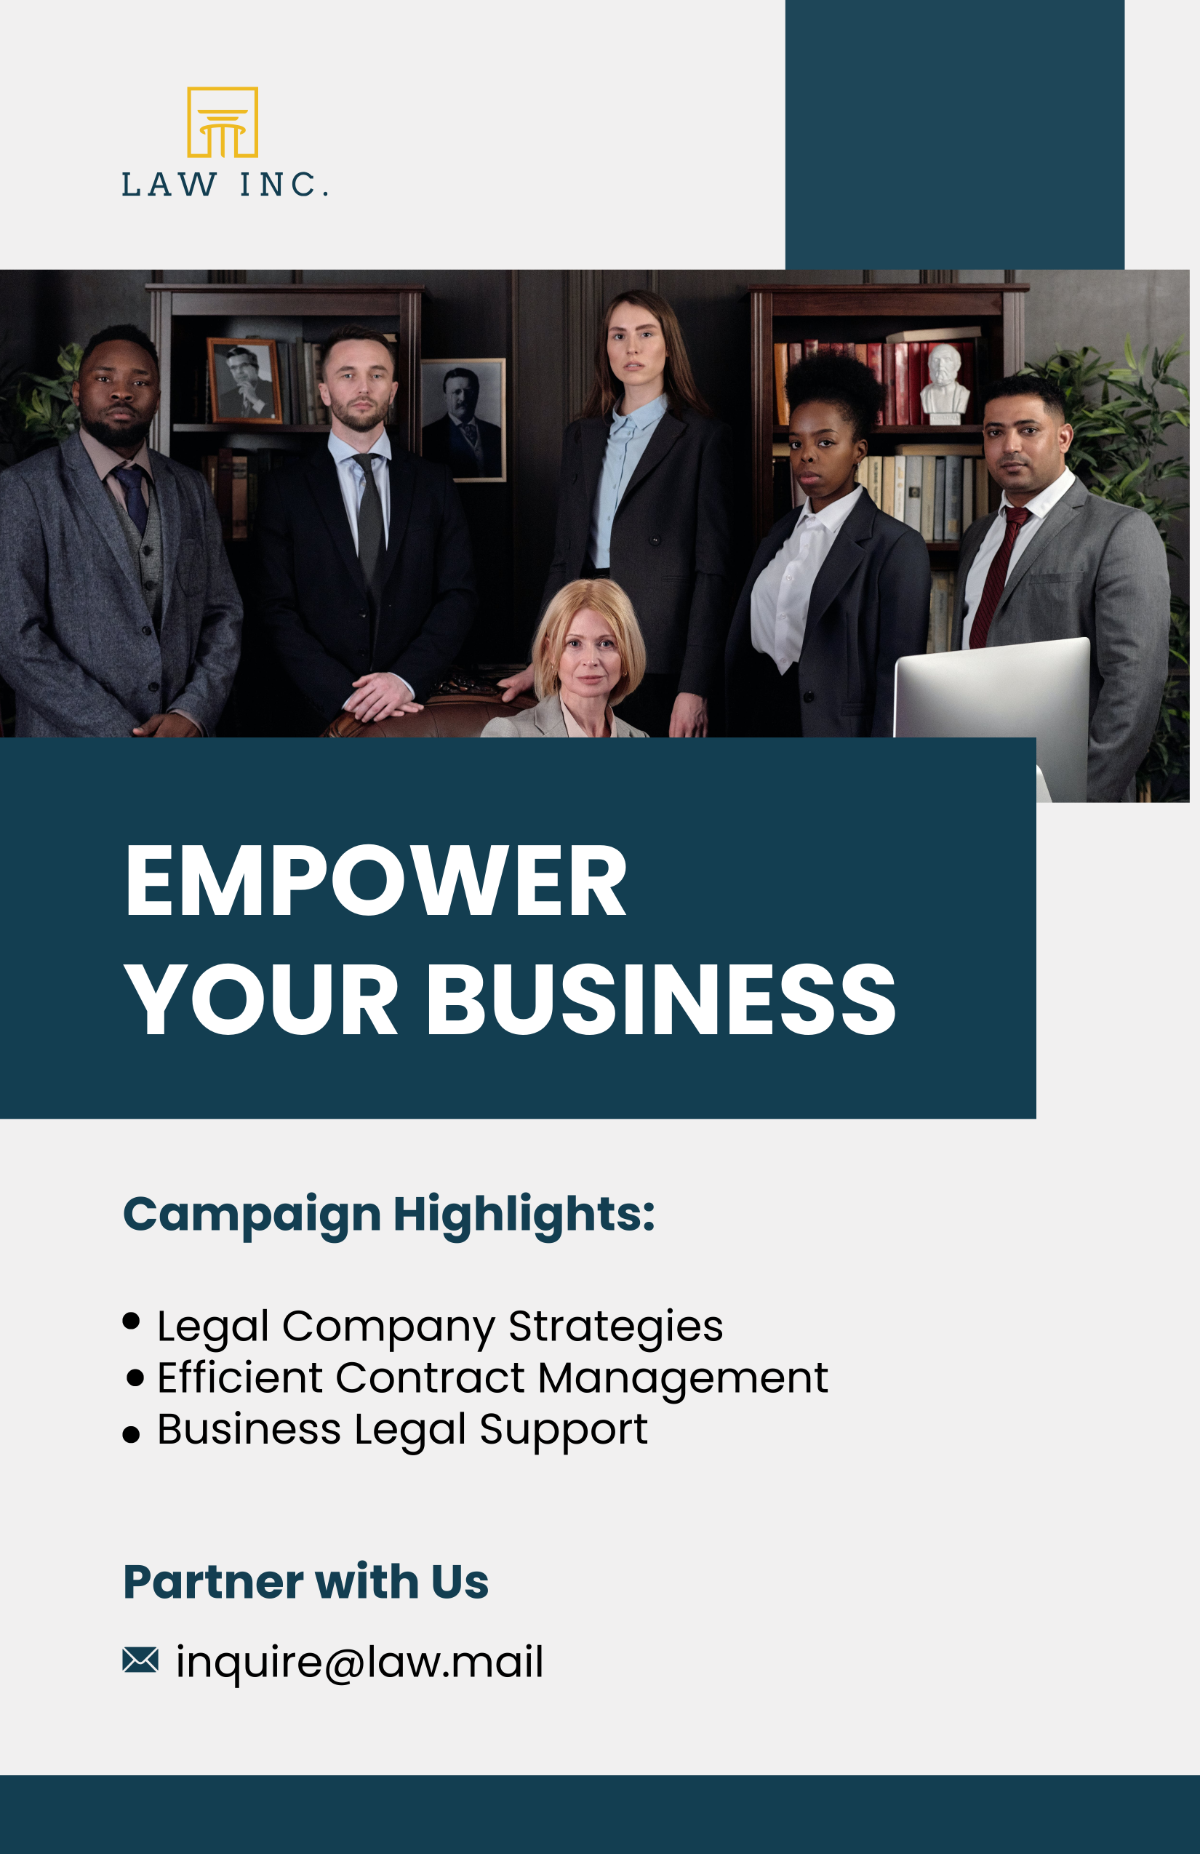 Law Firm Campaign Poster